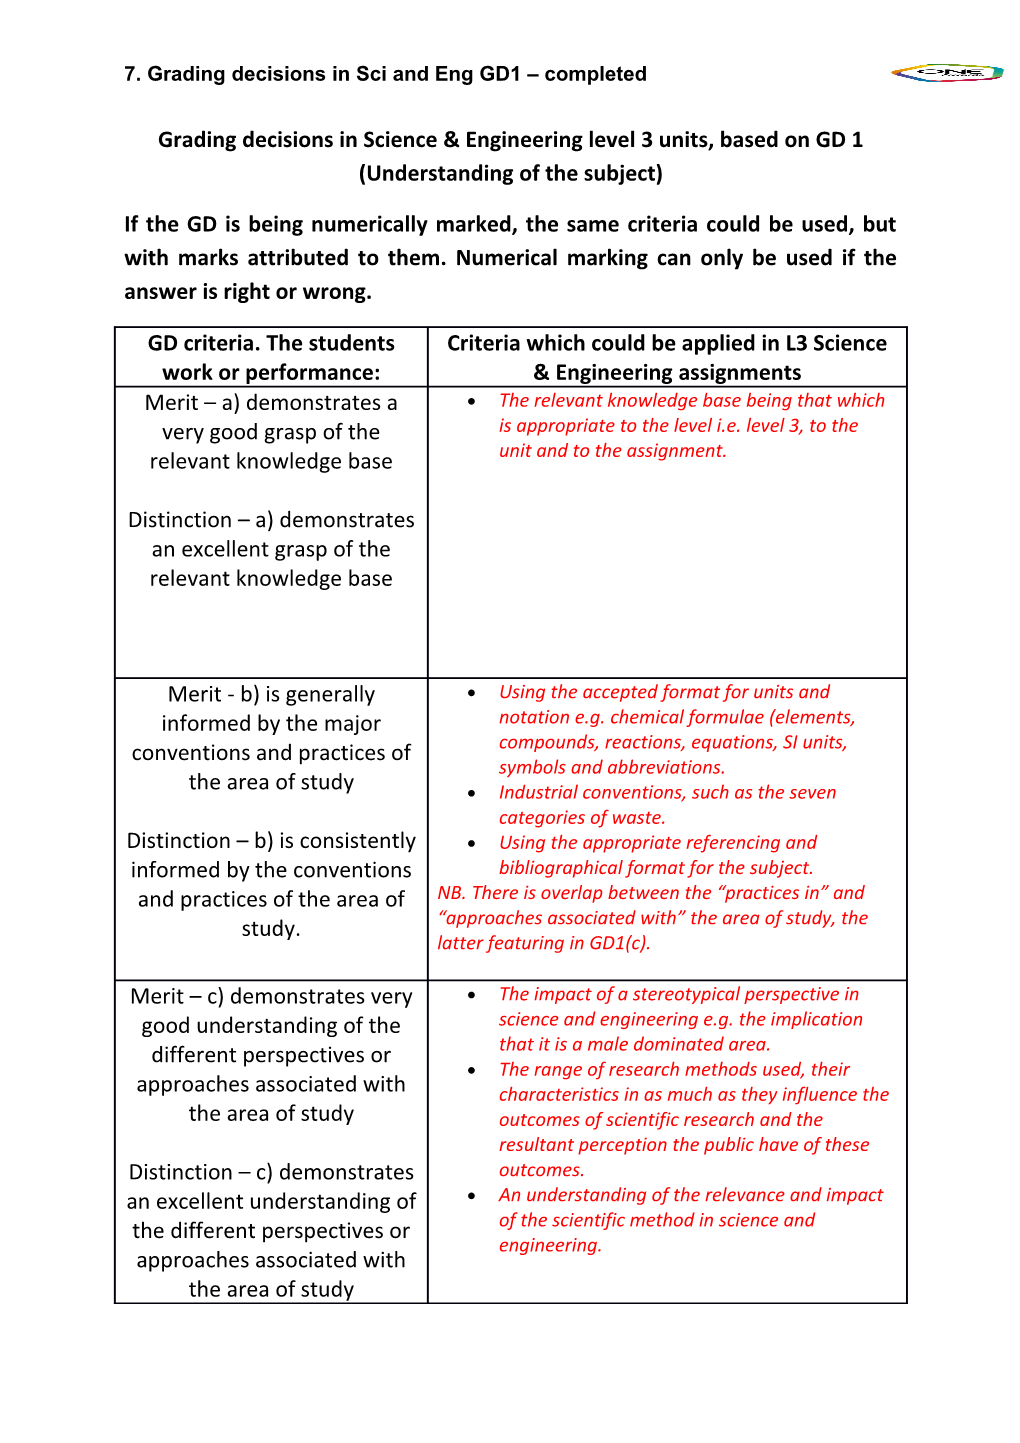 Grading Decisions in Science & Engineering Level 3 Units, Based on GD 1 (Understanding